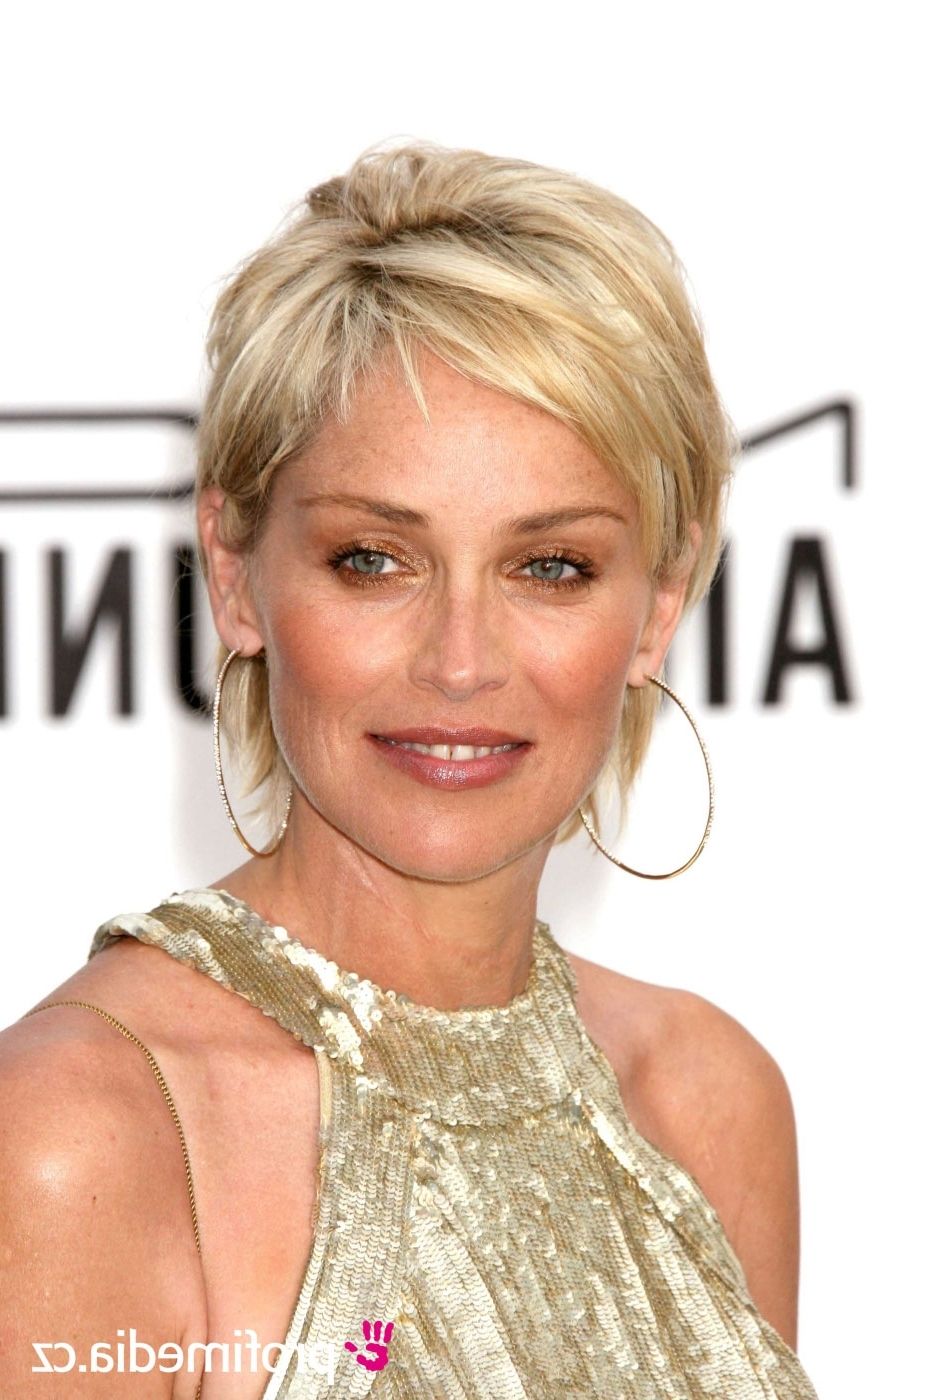 Sharon Stone Hairstyles Alanlisi Fantastic Short Hair Celebrity Within Most Recently Sharon Stone Pixie Hairstyles (View 5 of 15)